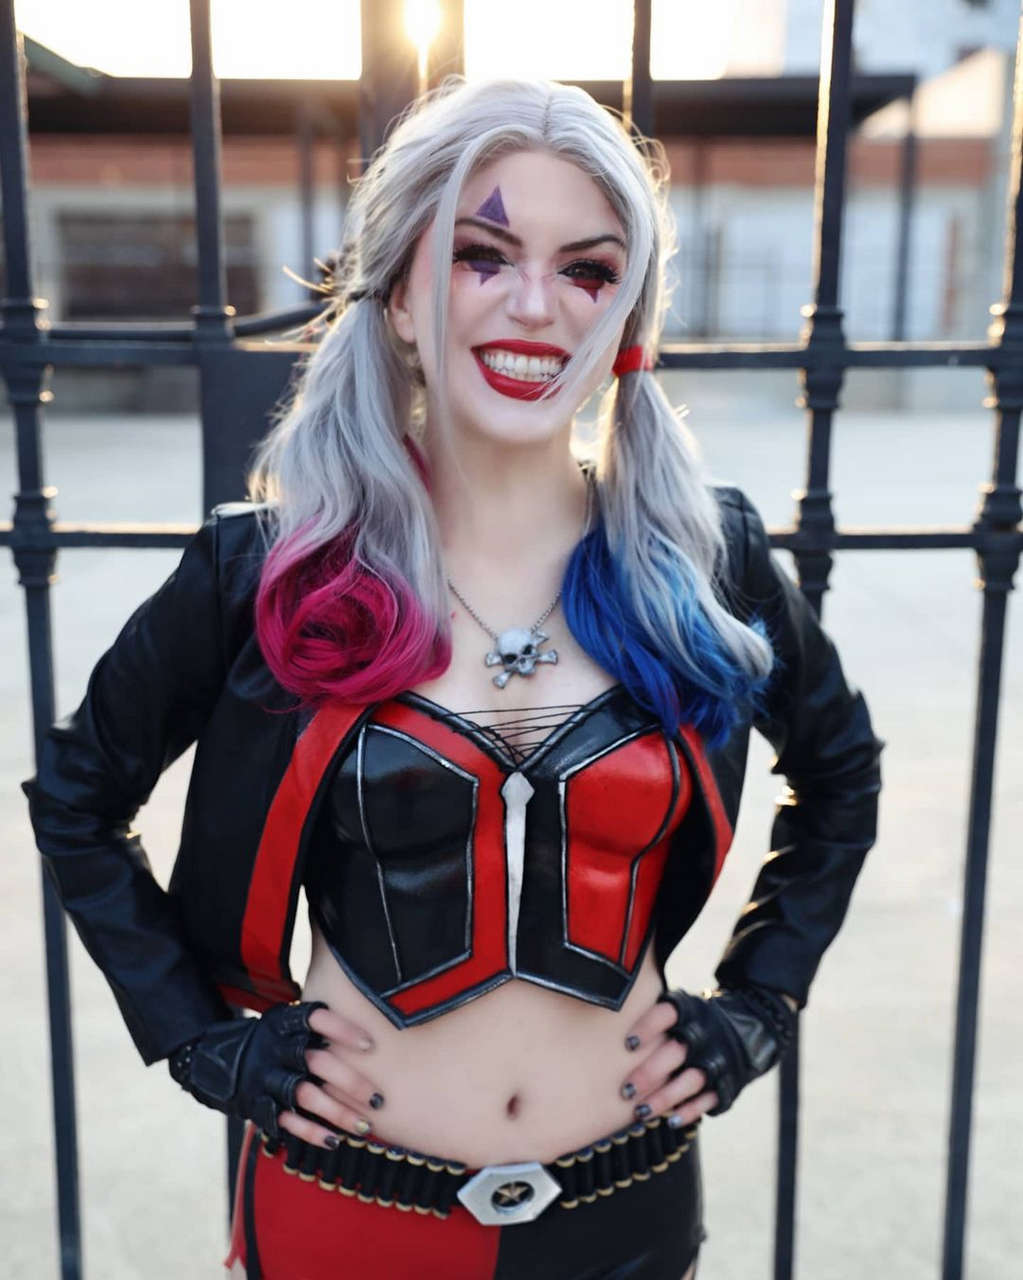 Kirstin From Armoredheartcosplay Harley Quinn